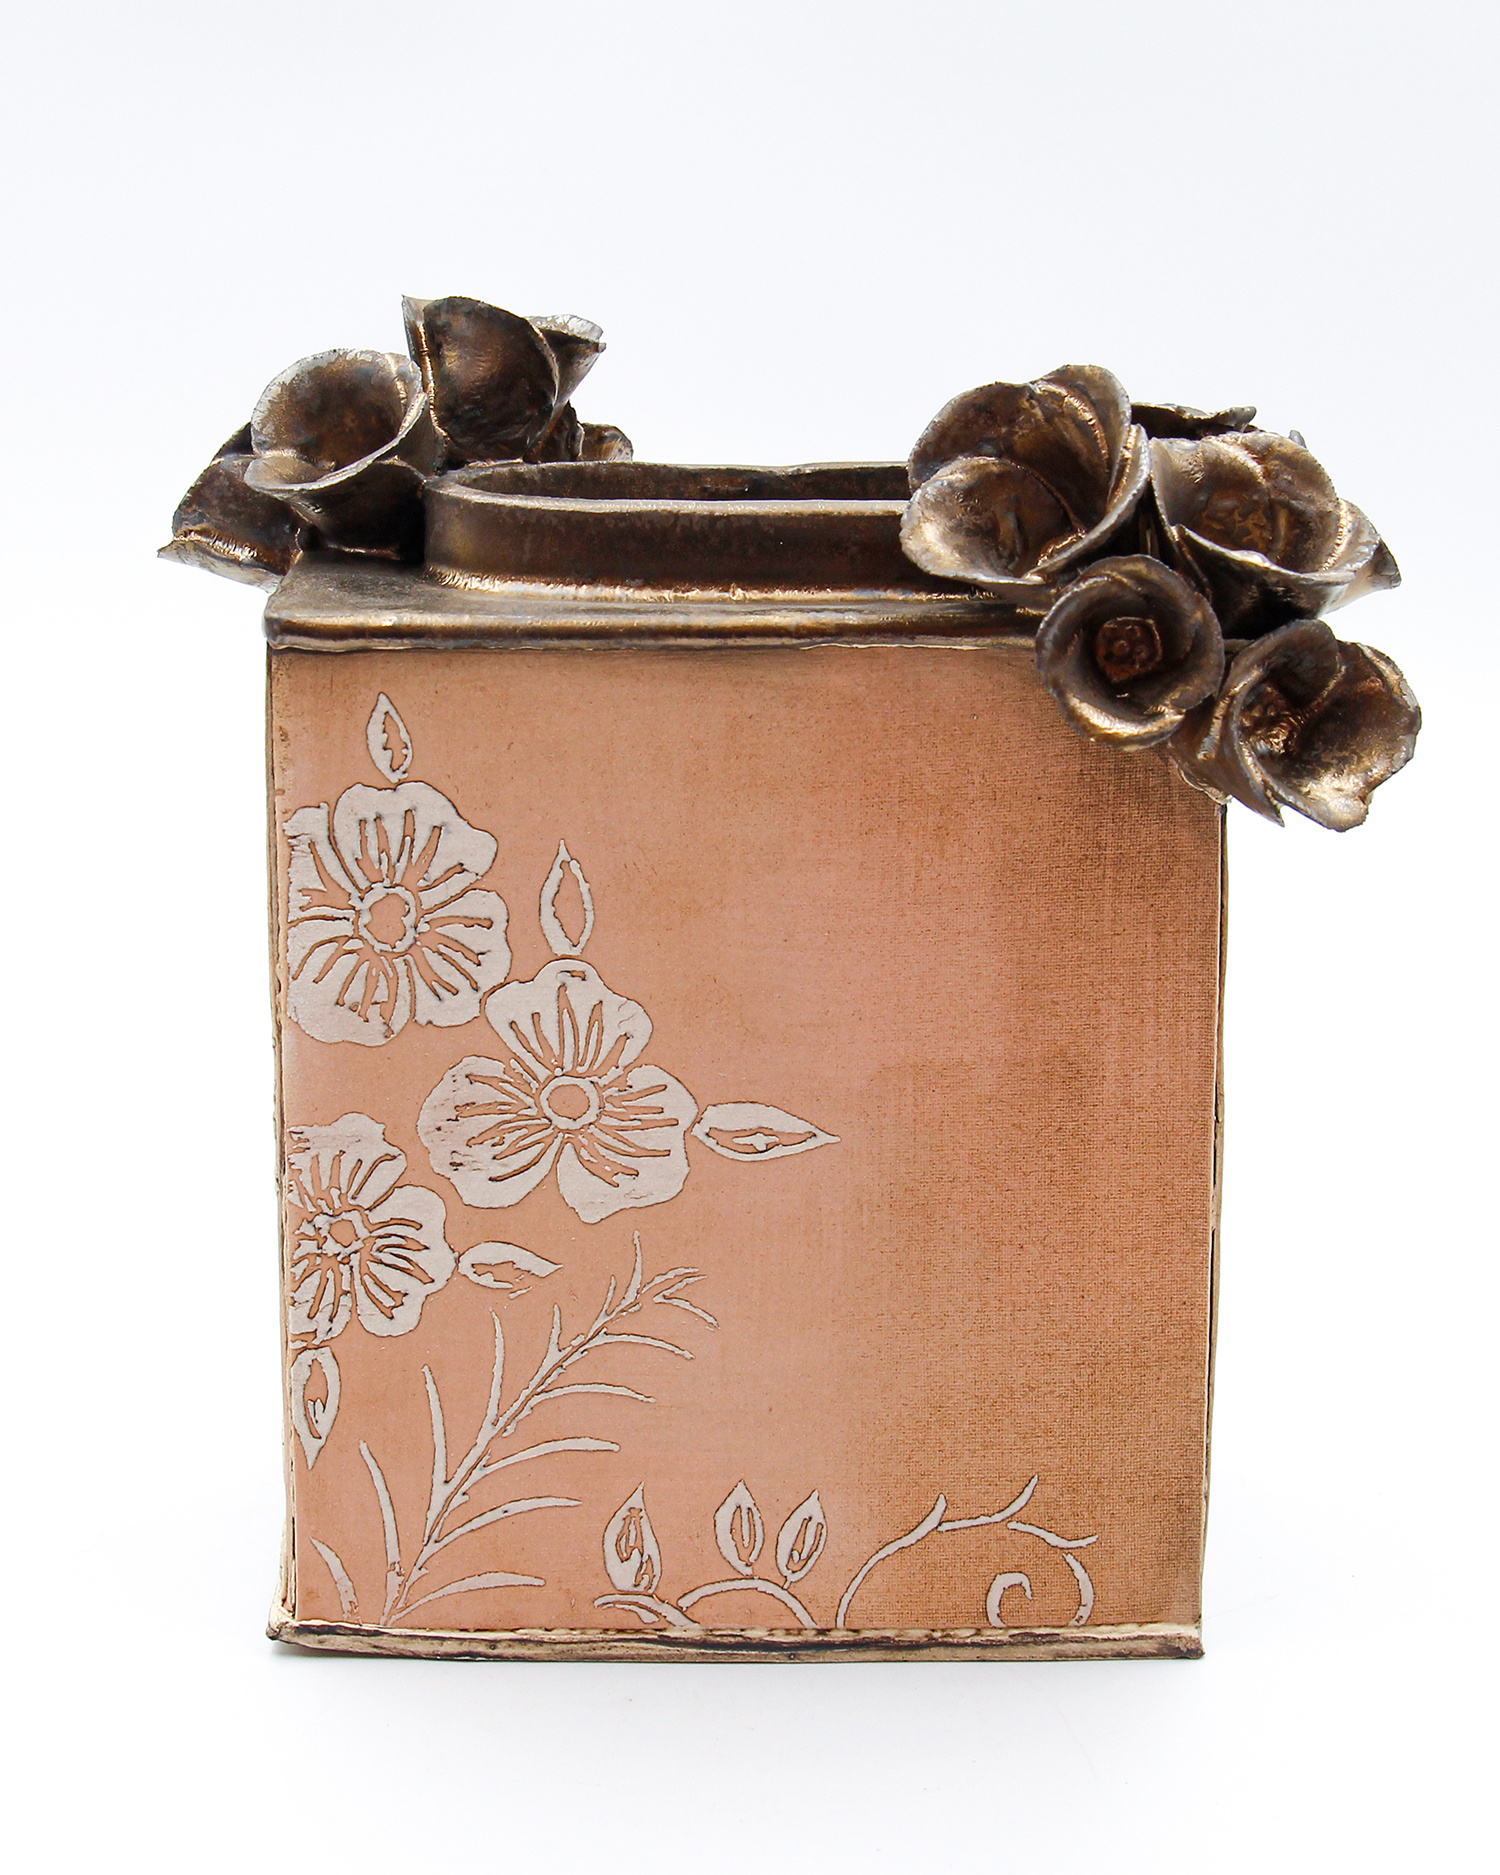 Pink Flower Brick with bronze flowers by Sarah Dunstan